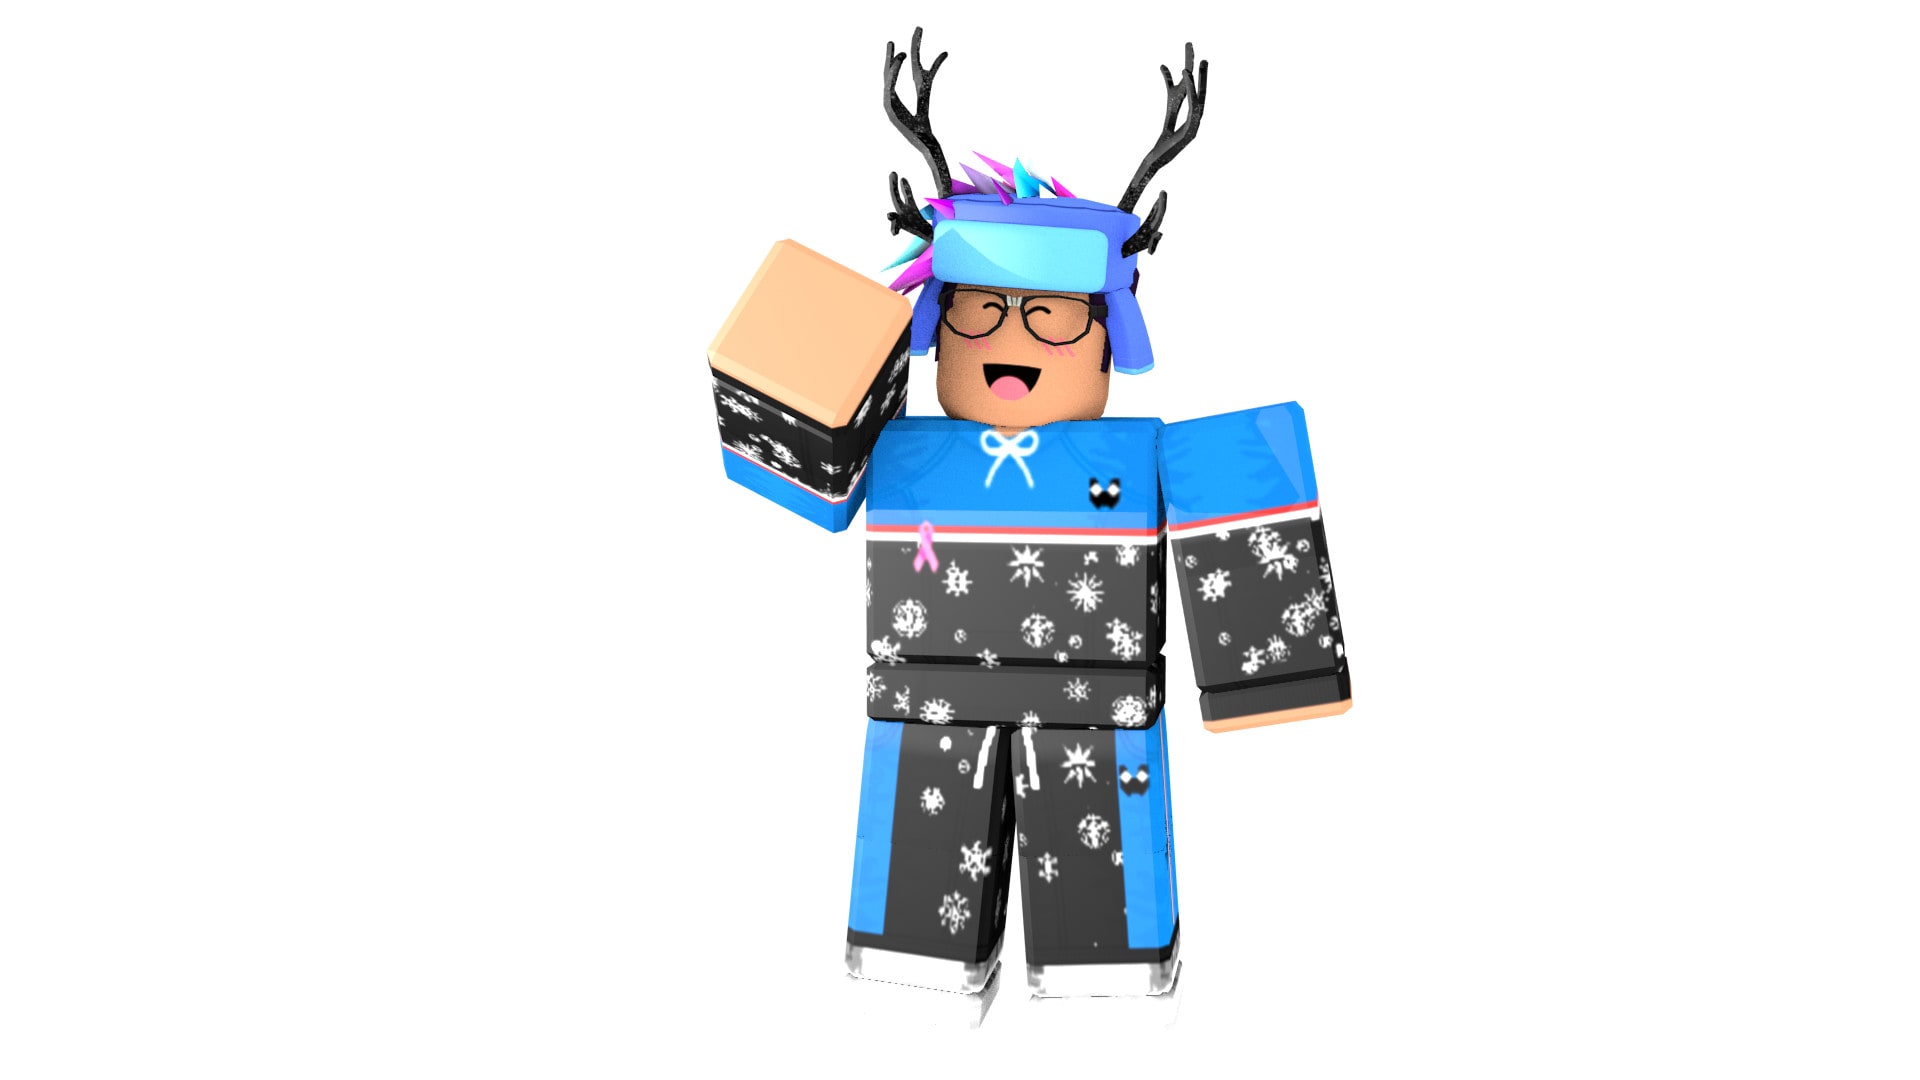 Make A Roblox Render Of You By Redsoldierone.